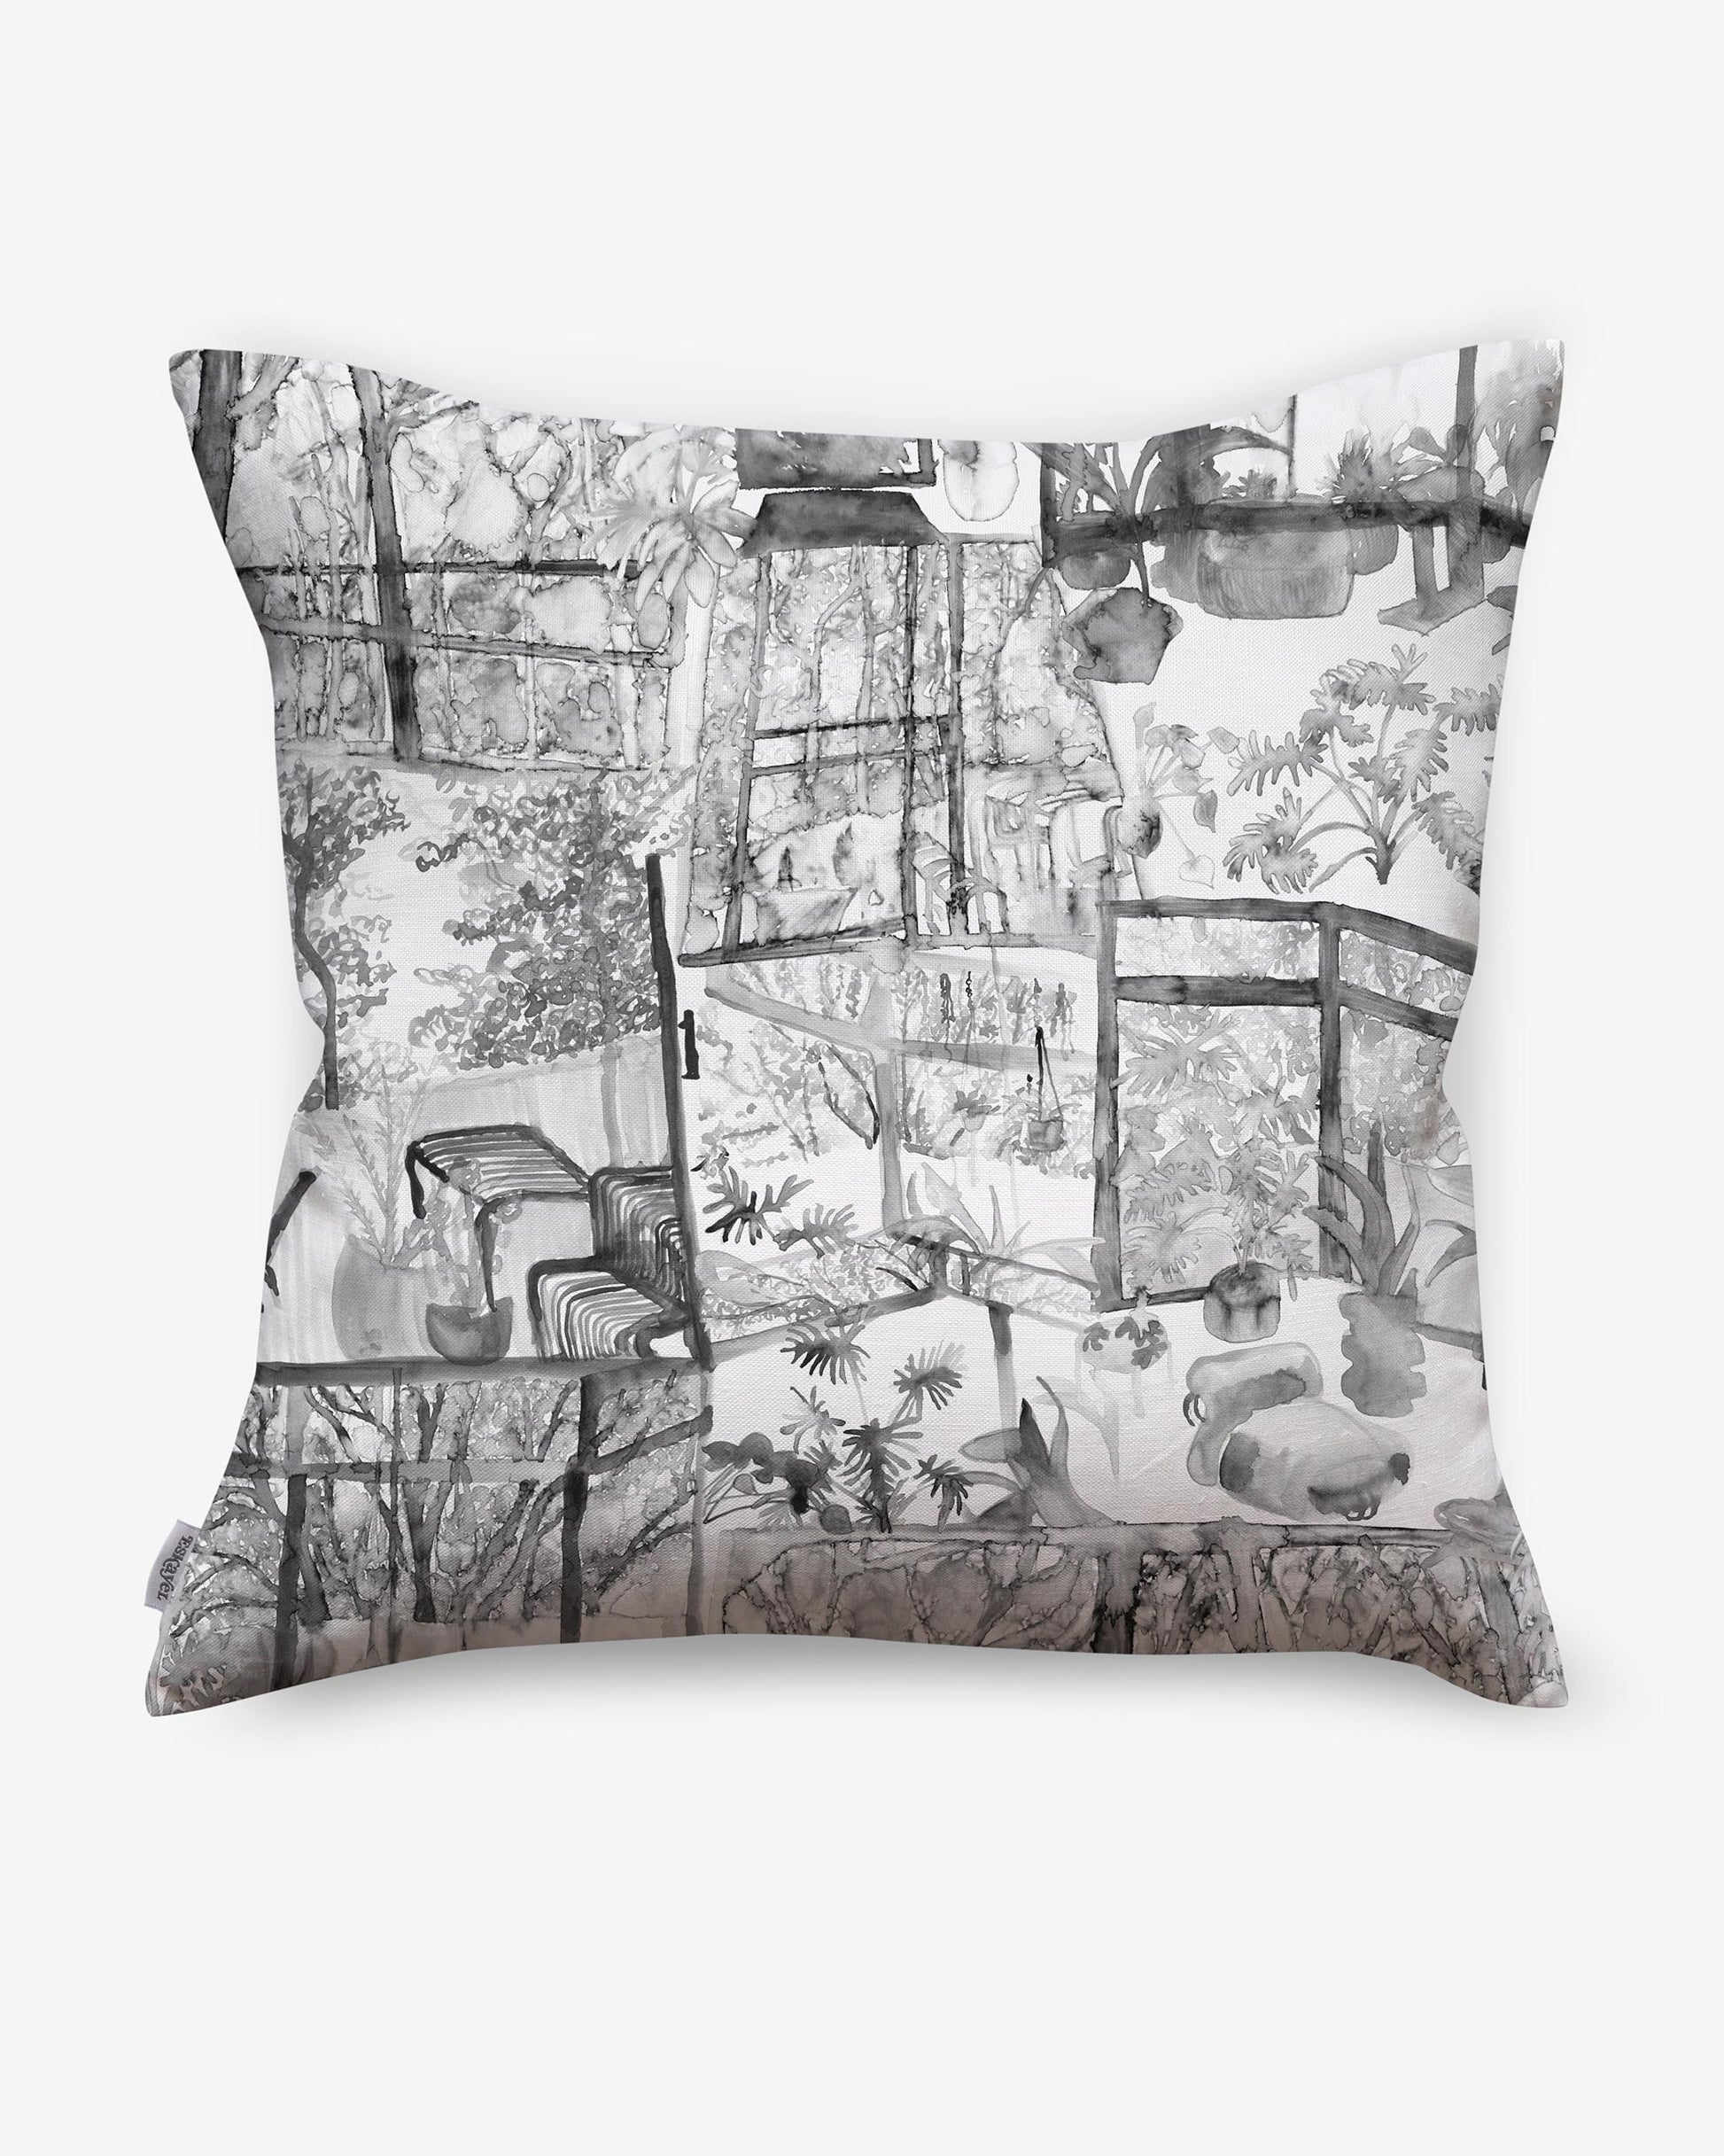 A Quotidiana Pillow in slate colorway with pictures on it